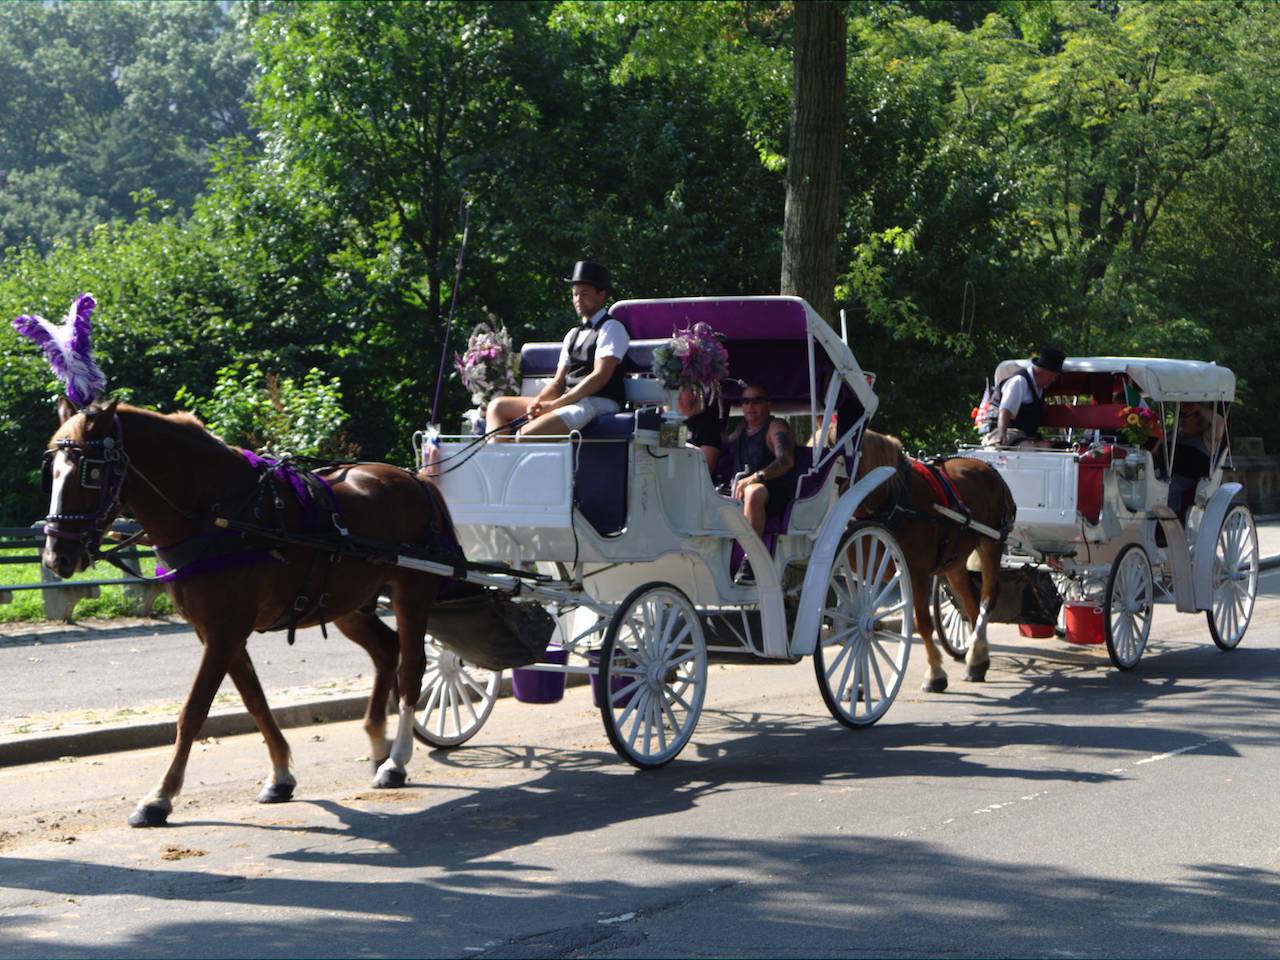 horse and carriage riding through Central Park